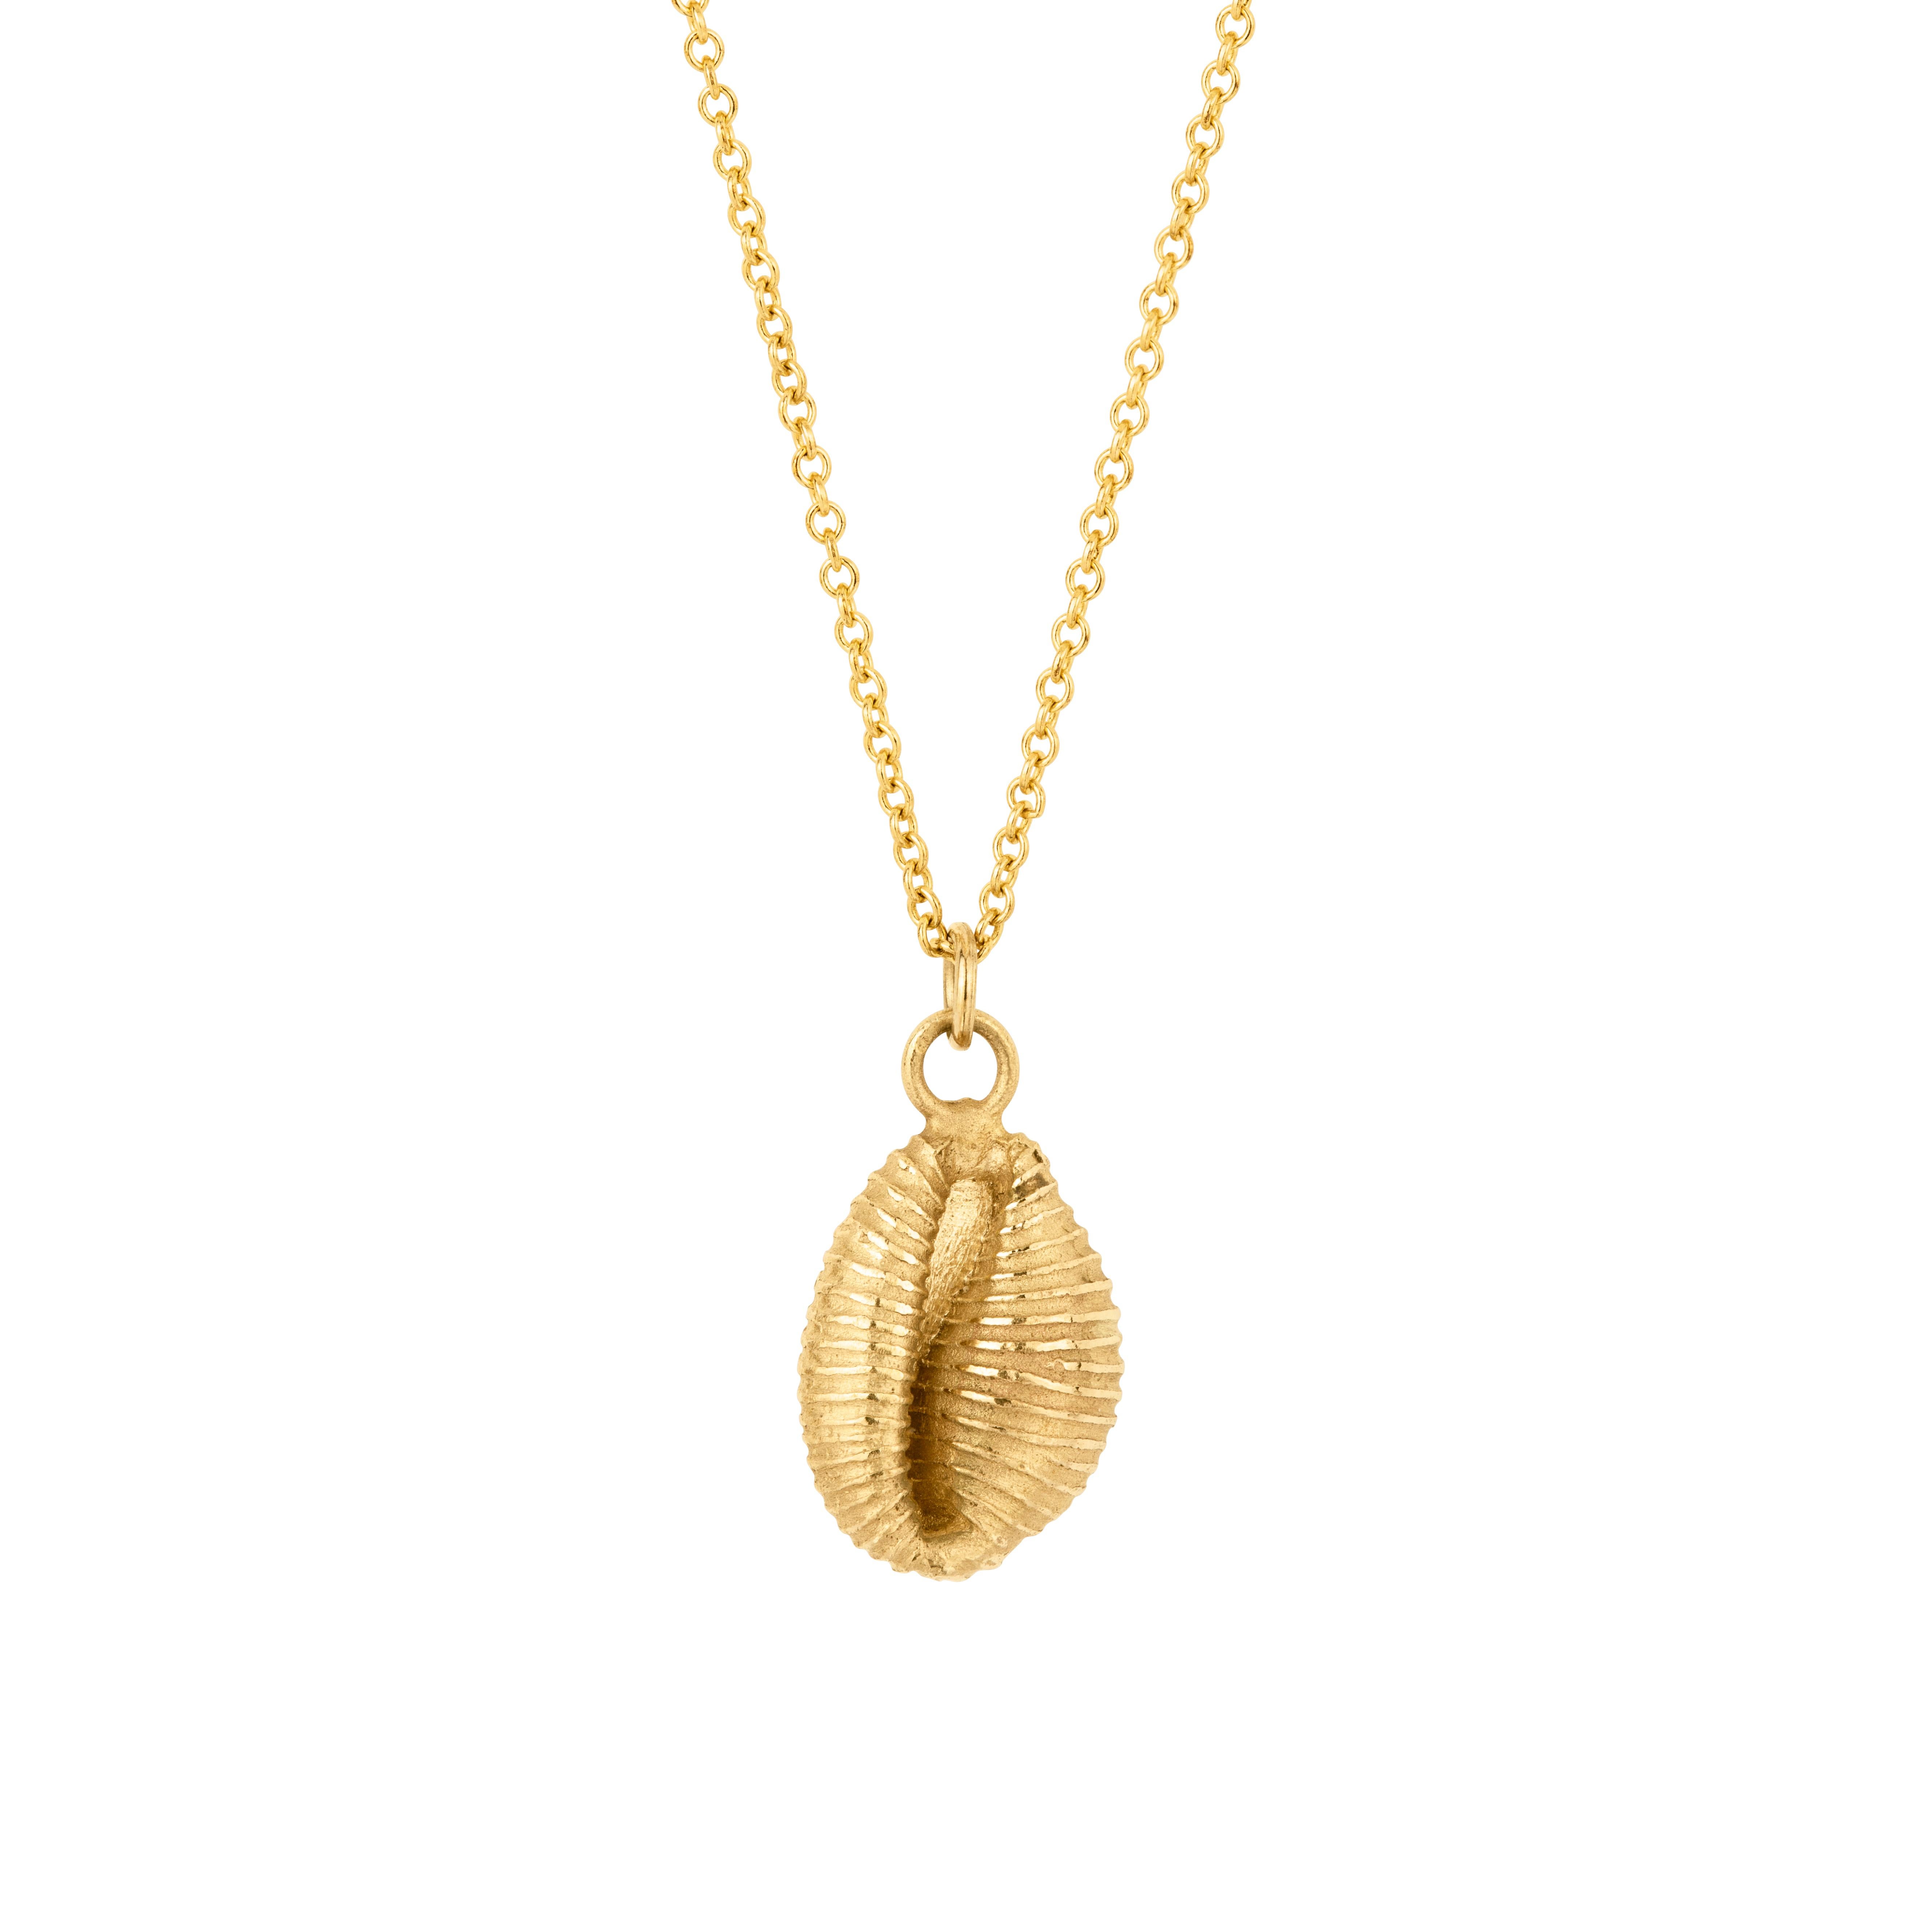 Here we have our solid gold cowrie shell pendant found by us on Bantham beach, in Devon. We found a few perfect tiny shells which we have decided to have cast. This lovely shell would be perfect for any beach lovers gift.

We hunted for ages on the